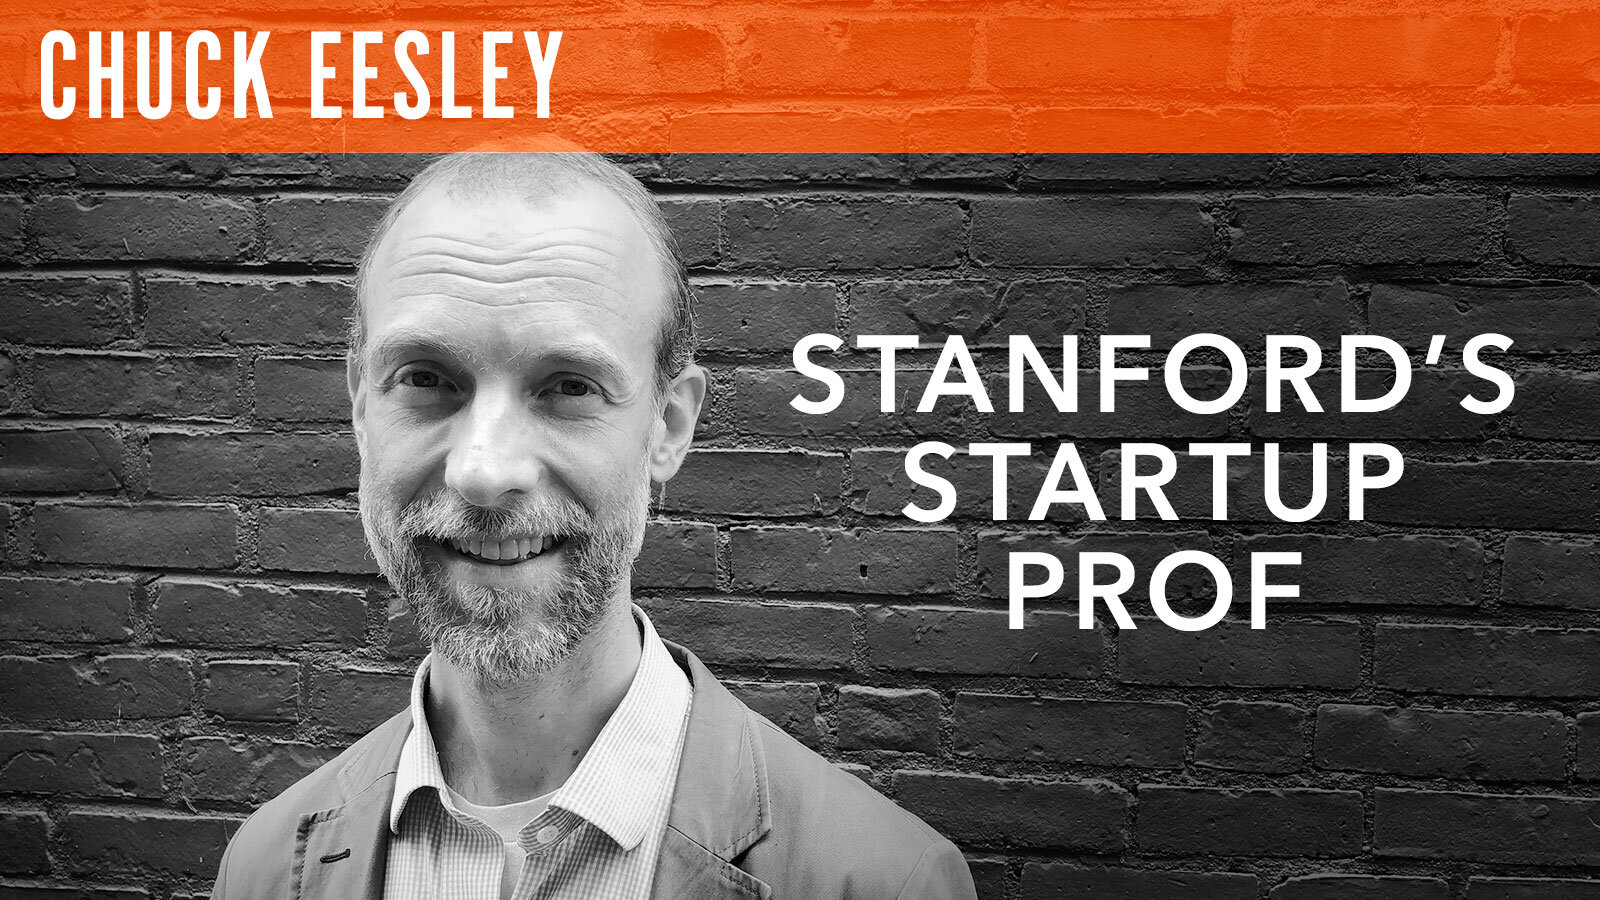 Chuck Eesley, "Stanford's Startup Prof"